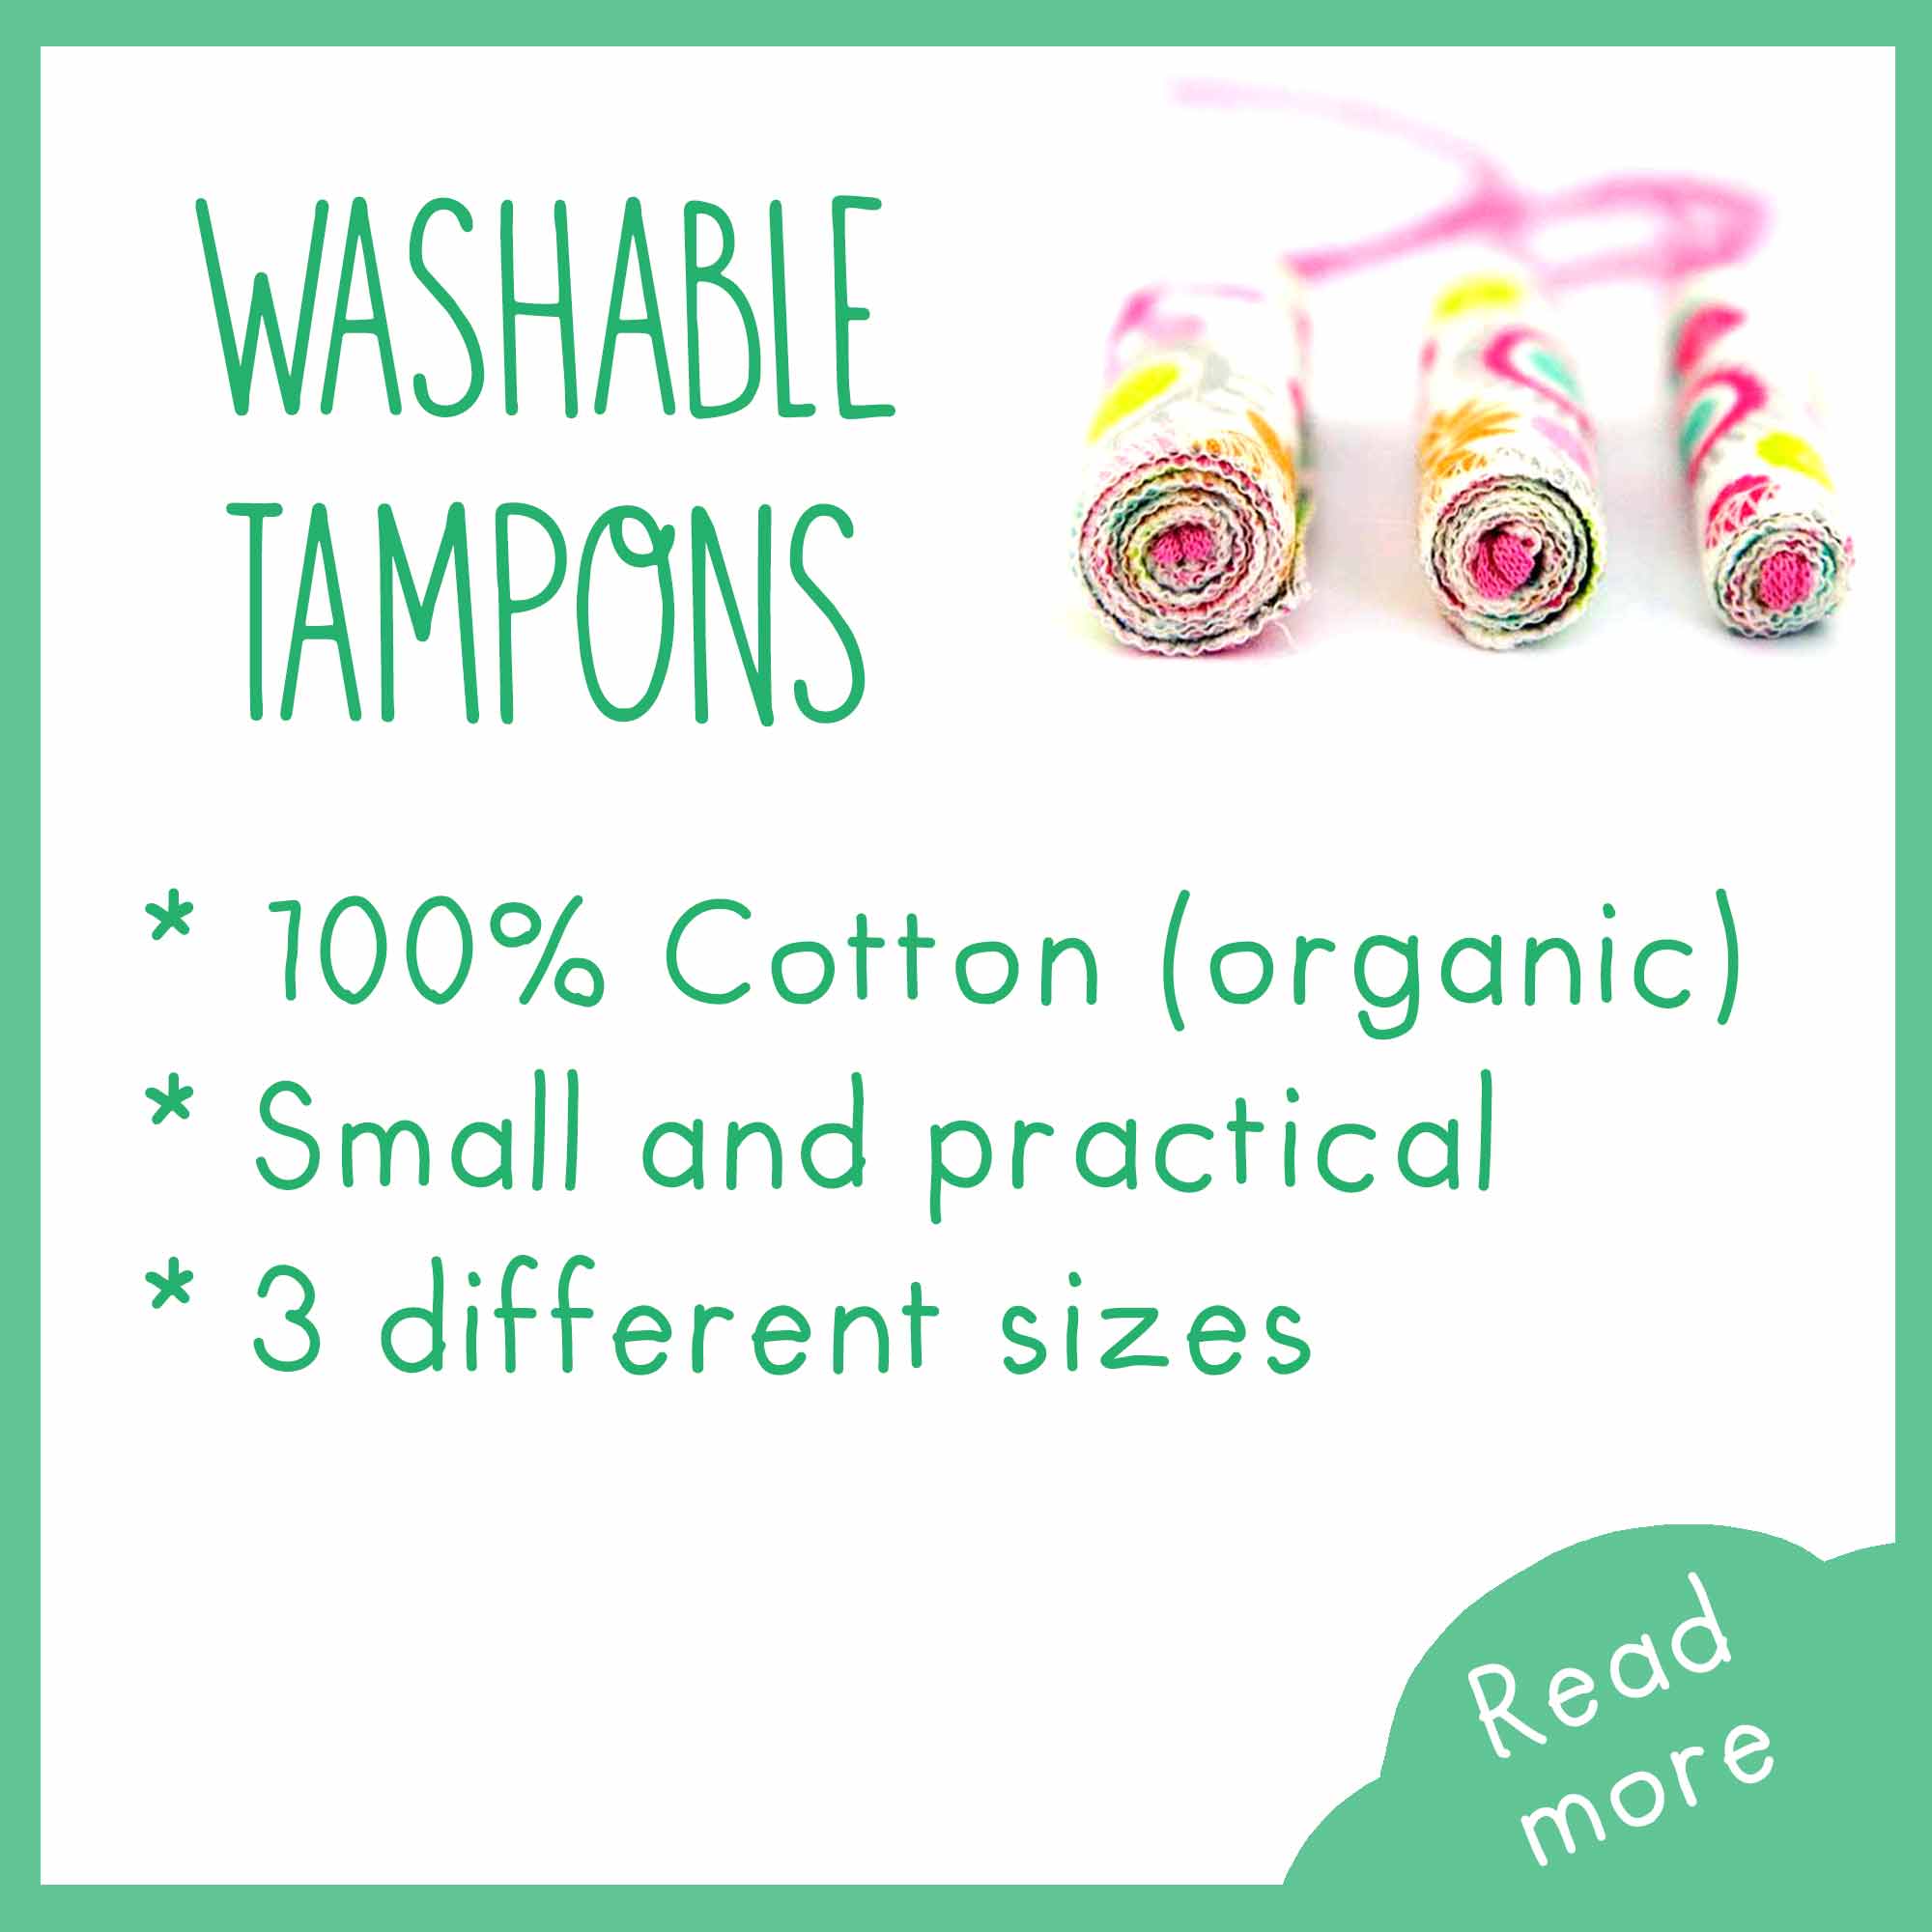 washable tampons, 100% cotton organic, small and practical, 3 different sizes.